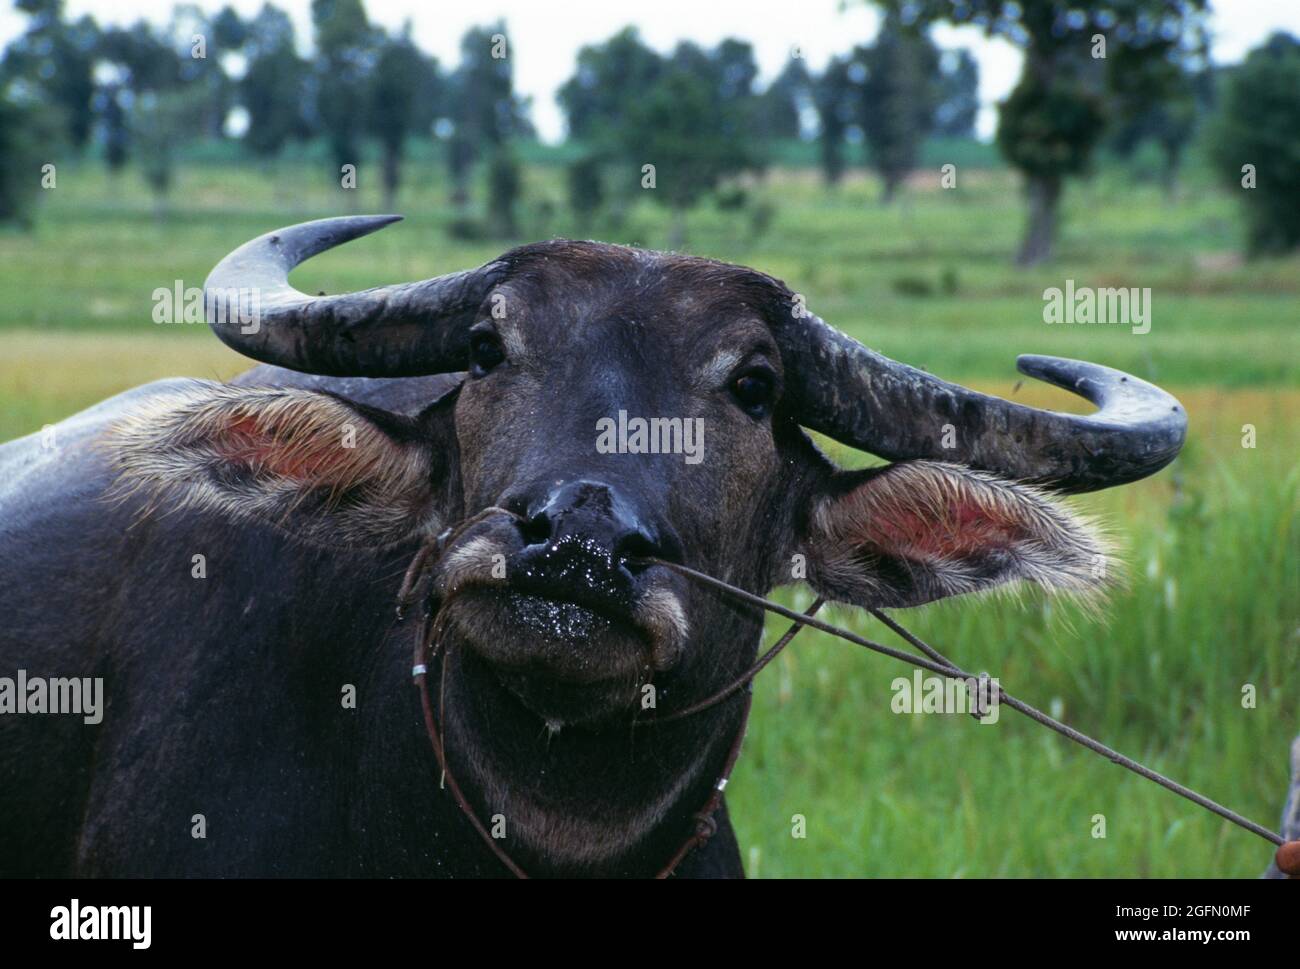 Thailand. Agriculture. Water Buffalo. Stock Photo